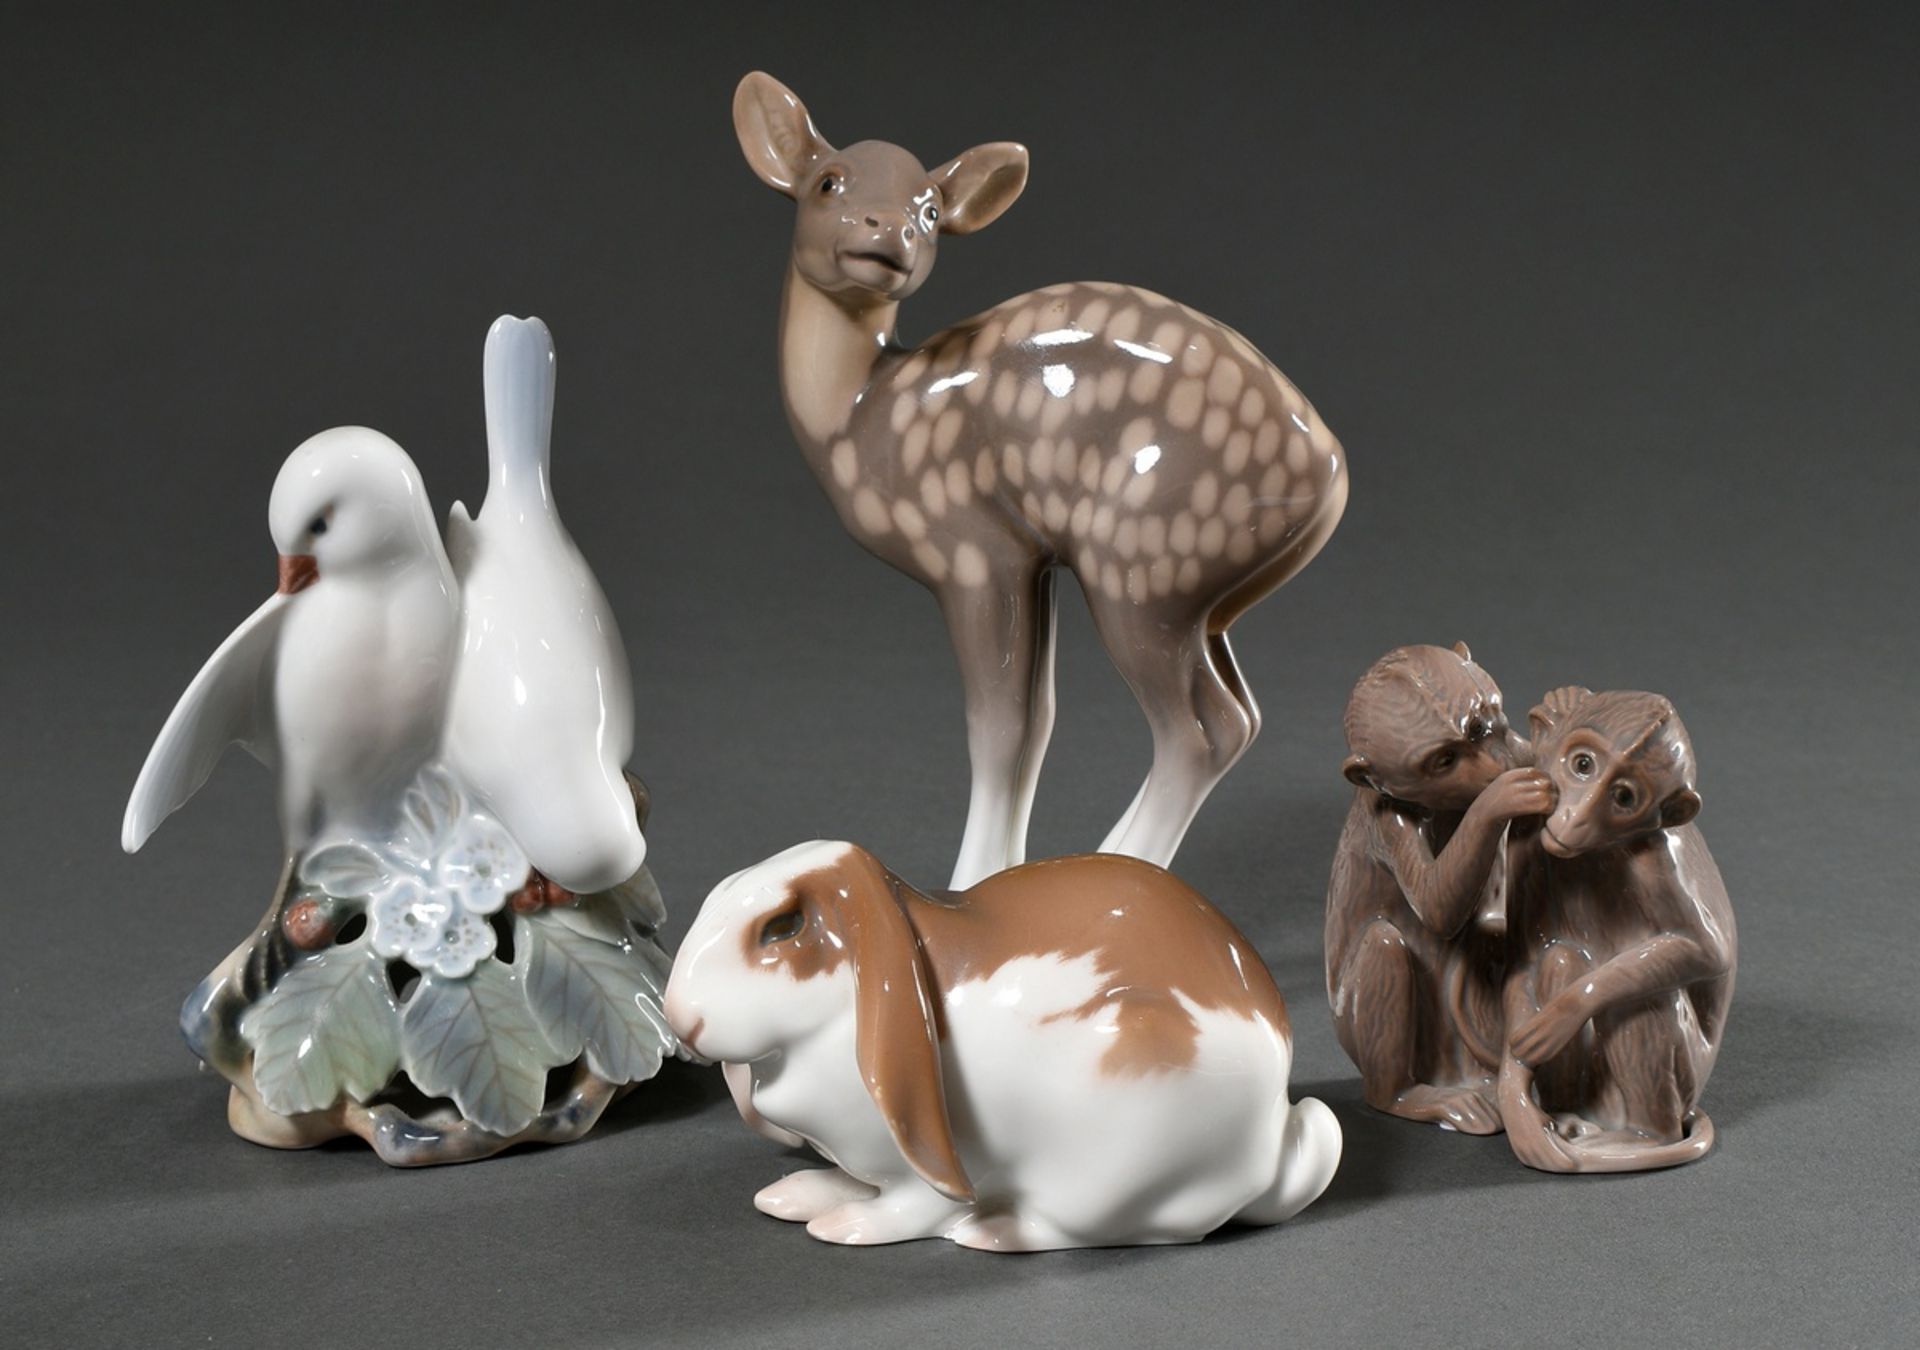 4 Various porcelain figures "Pair of Birds", "Pair of Monkeys", "Ram Rabbit" and "Standing Stag" wi